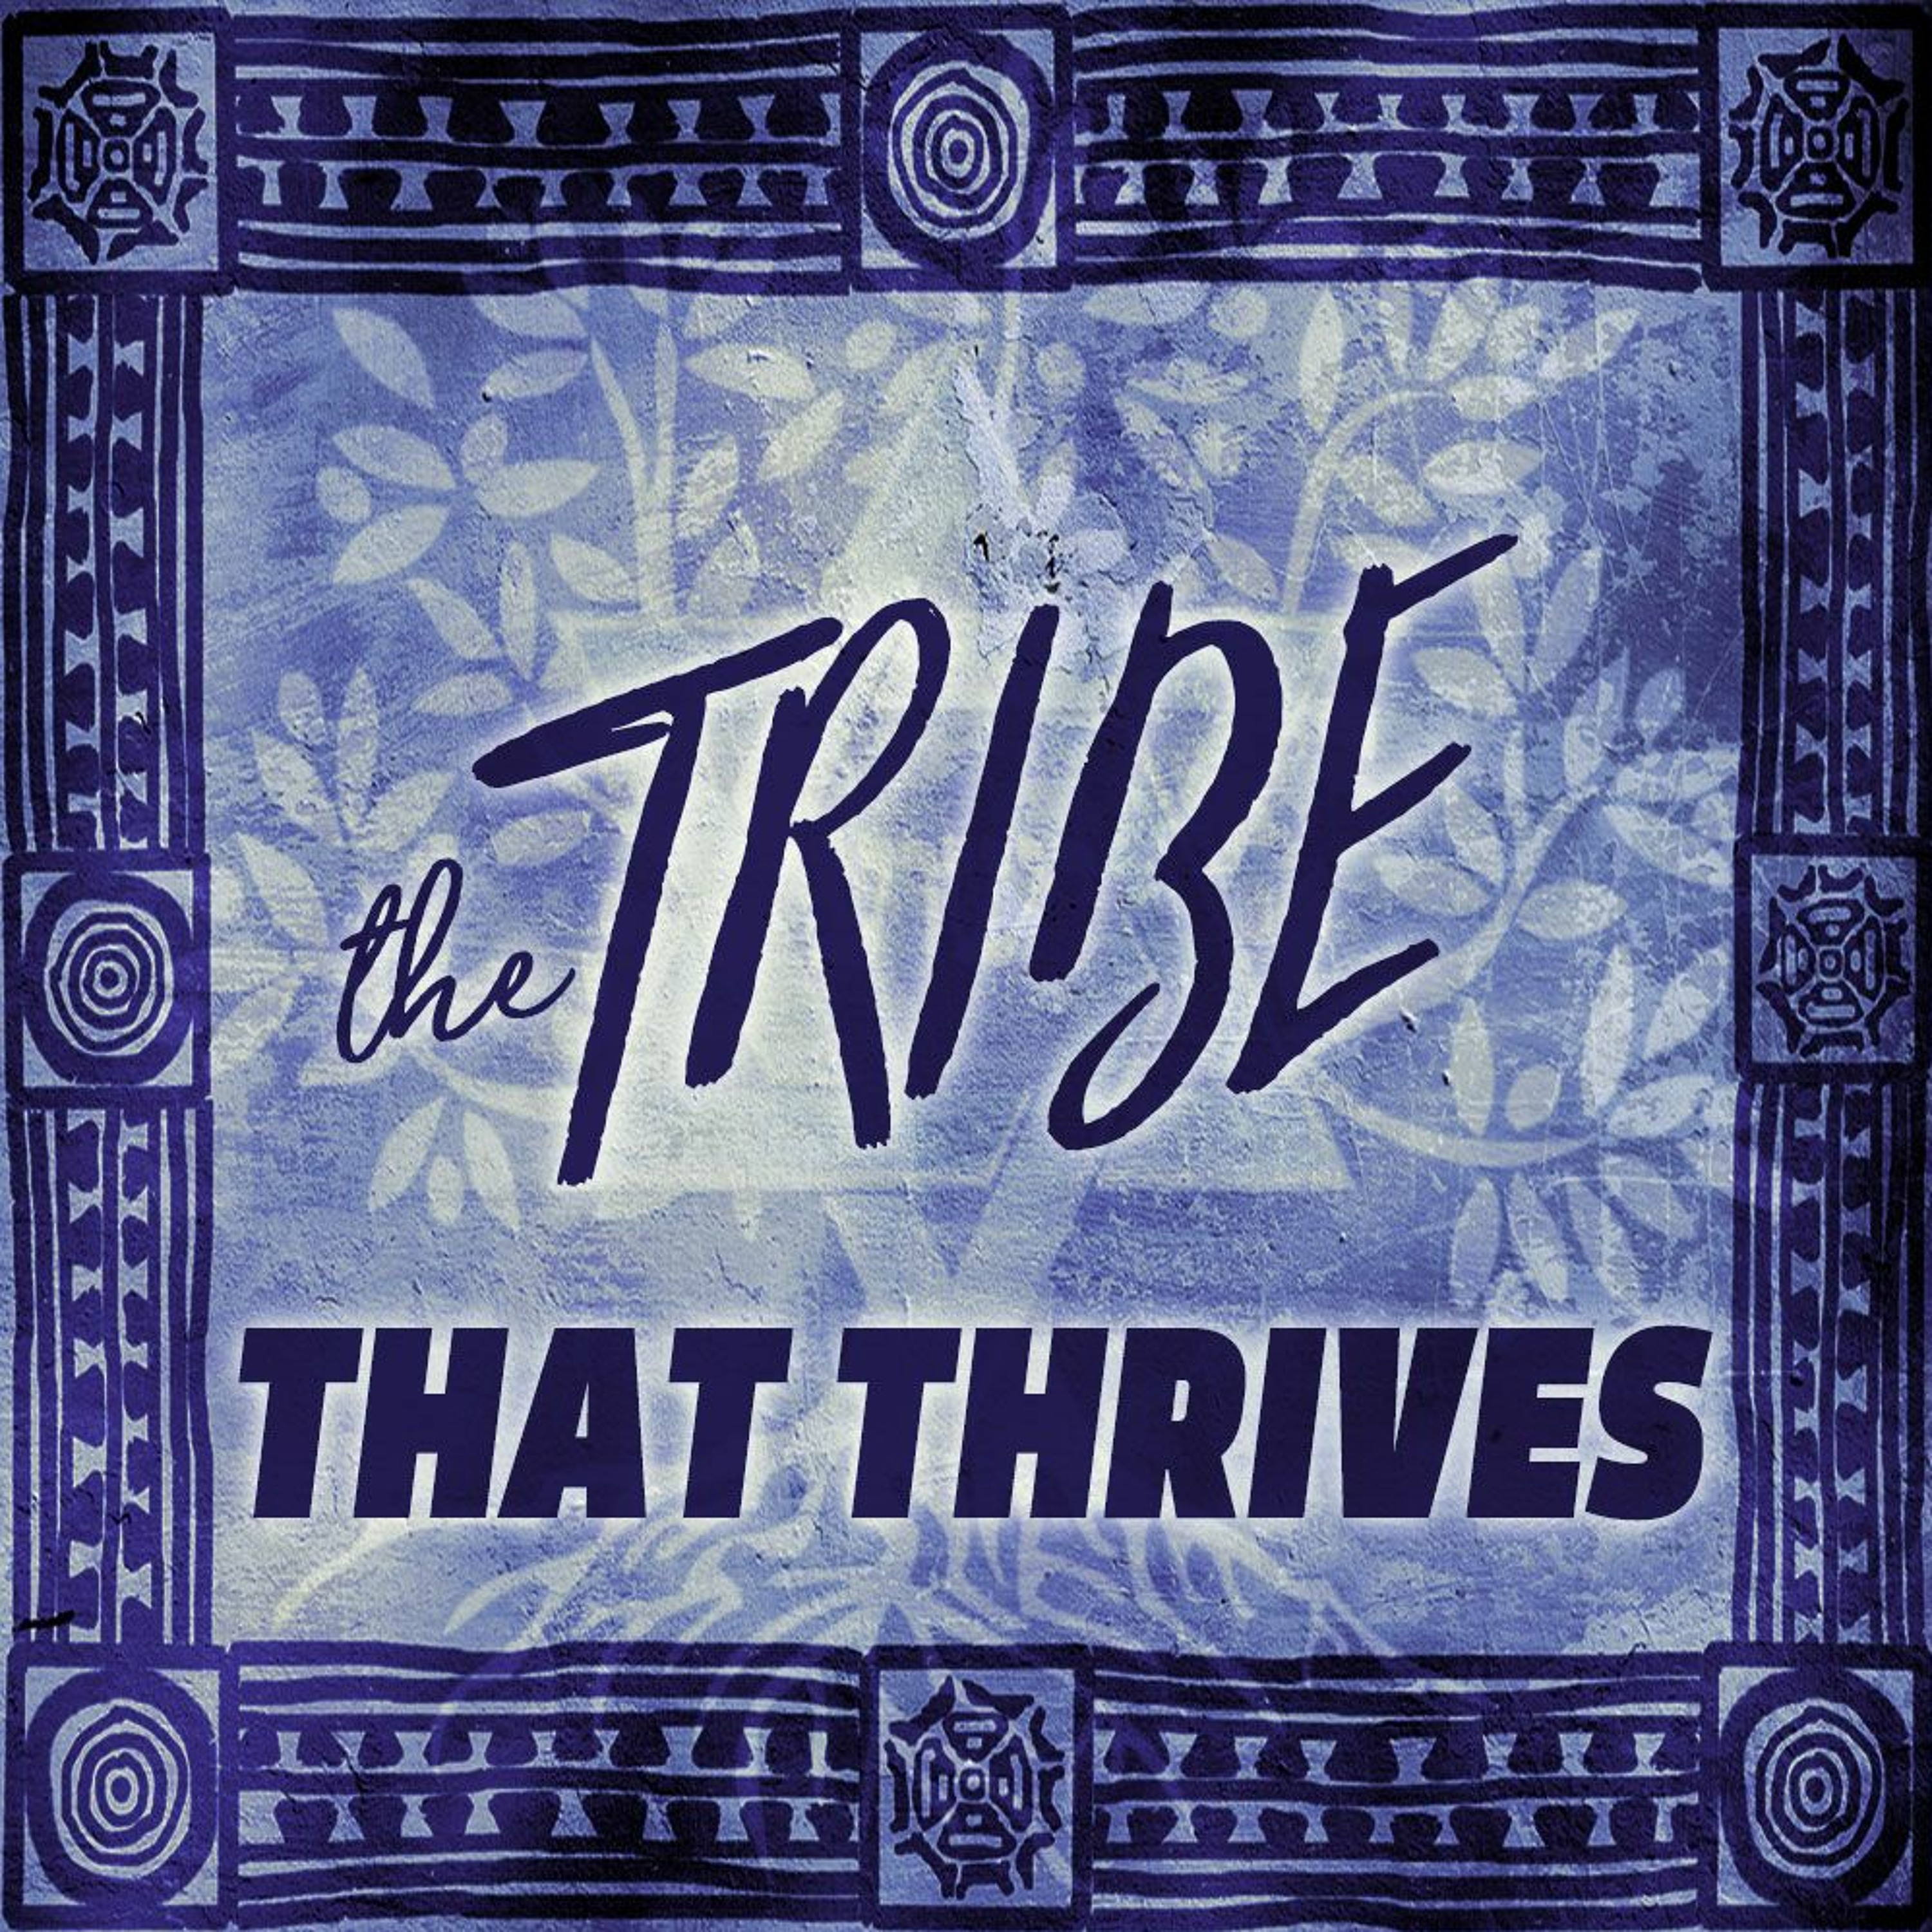 The Tribe That Thrives